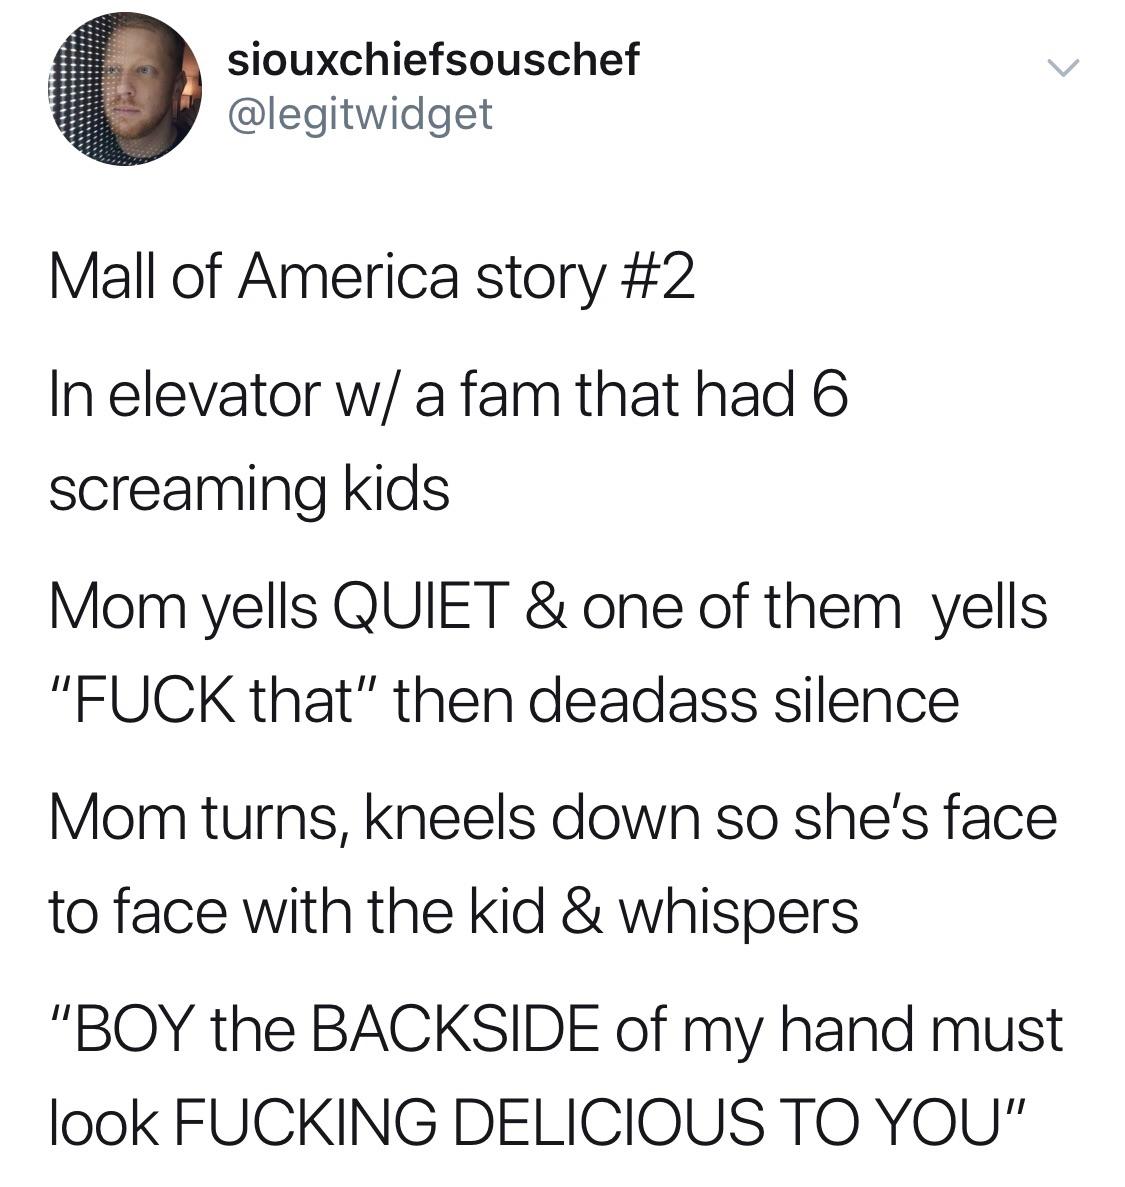 angle - siouxchiefsouschef Mall of America story In elevator w a fam that had 6 screaming kids Mom yells Quiet & one of them yells "Fuck that" then deadass silence Mom turns, kneels down so she's face to face with the kid & whispers "Boy the Backside of m